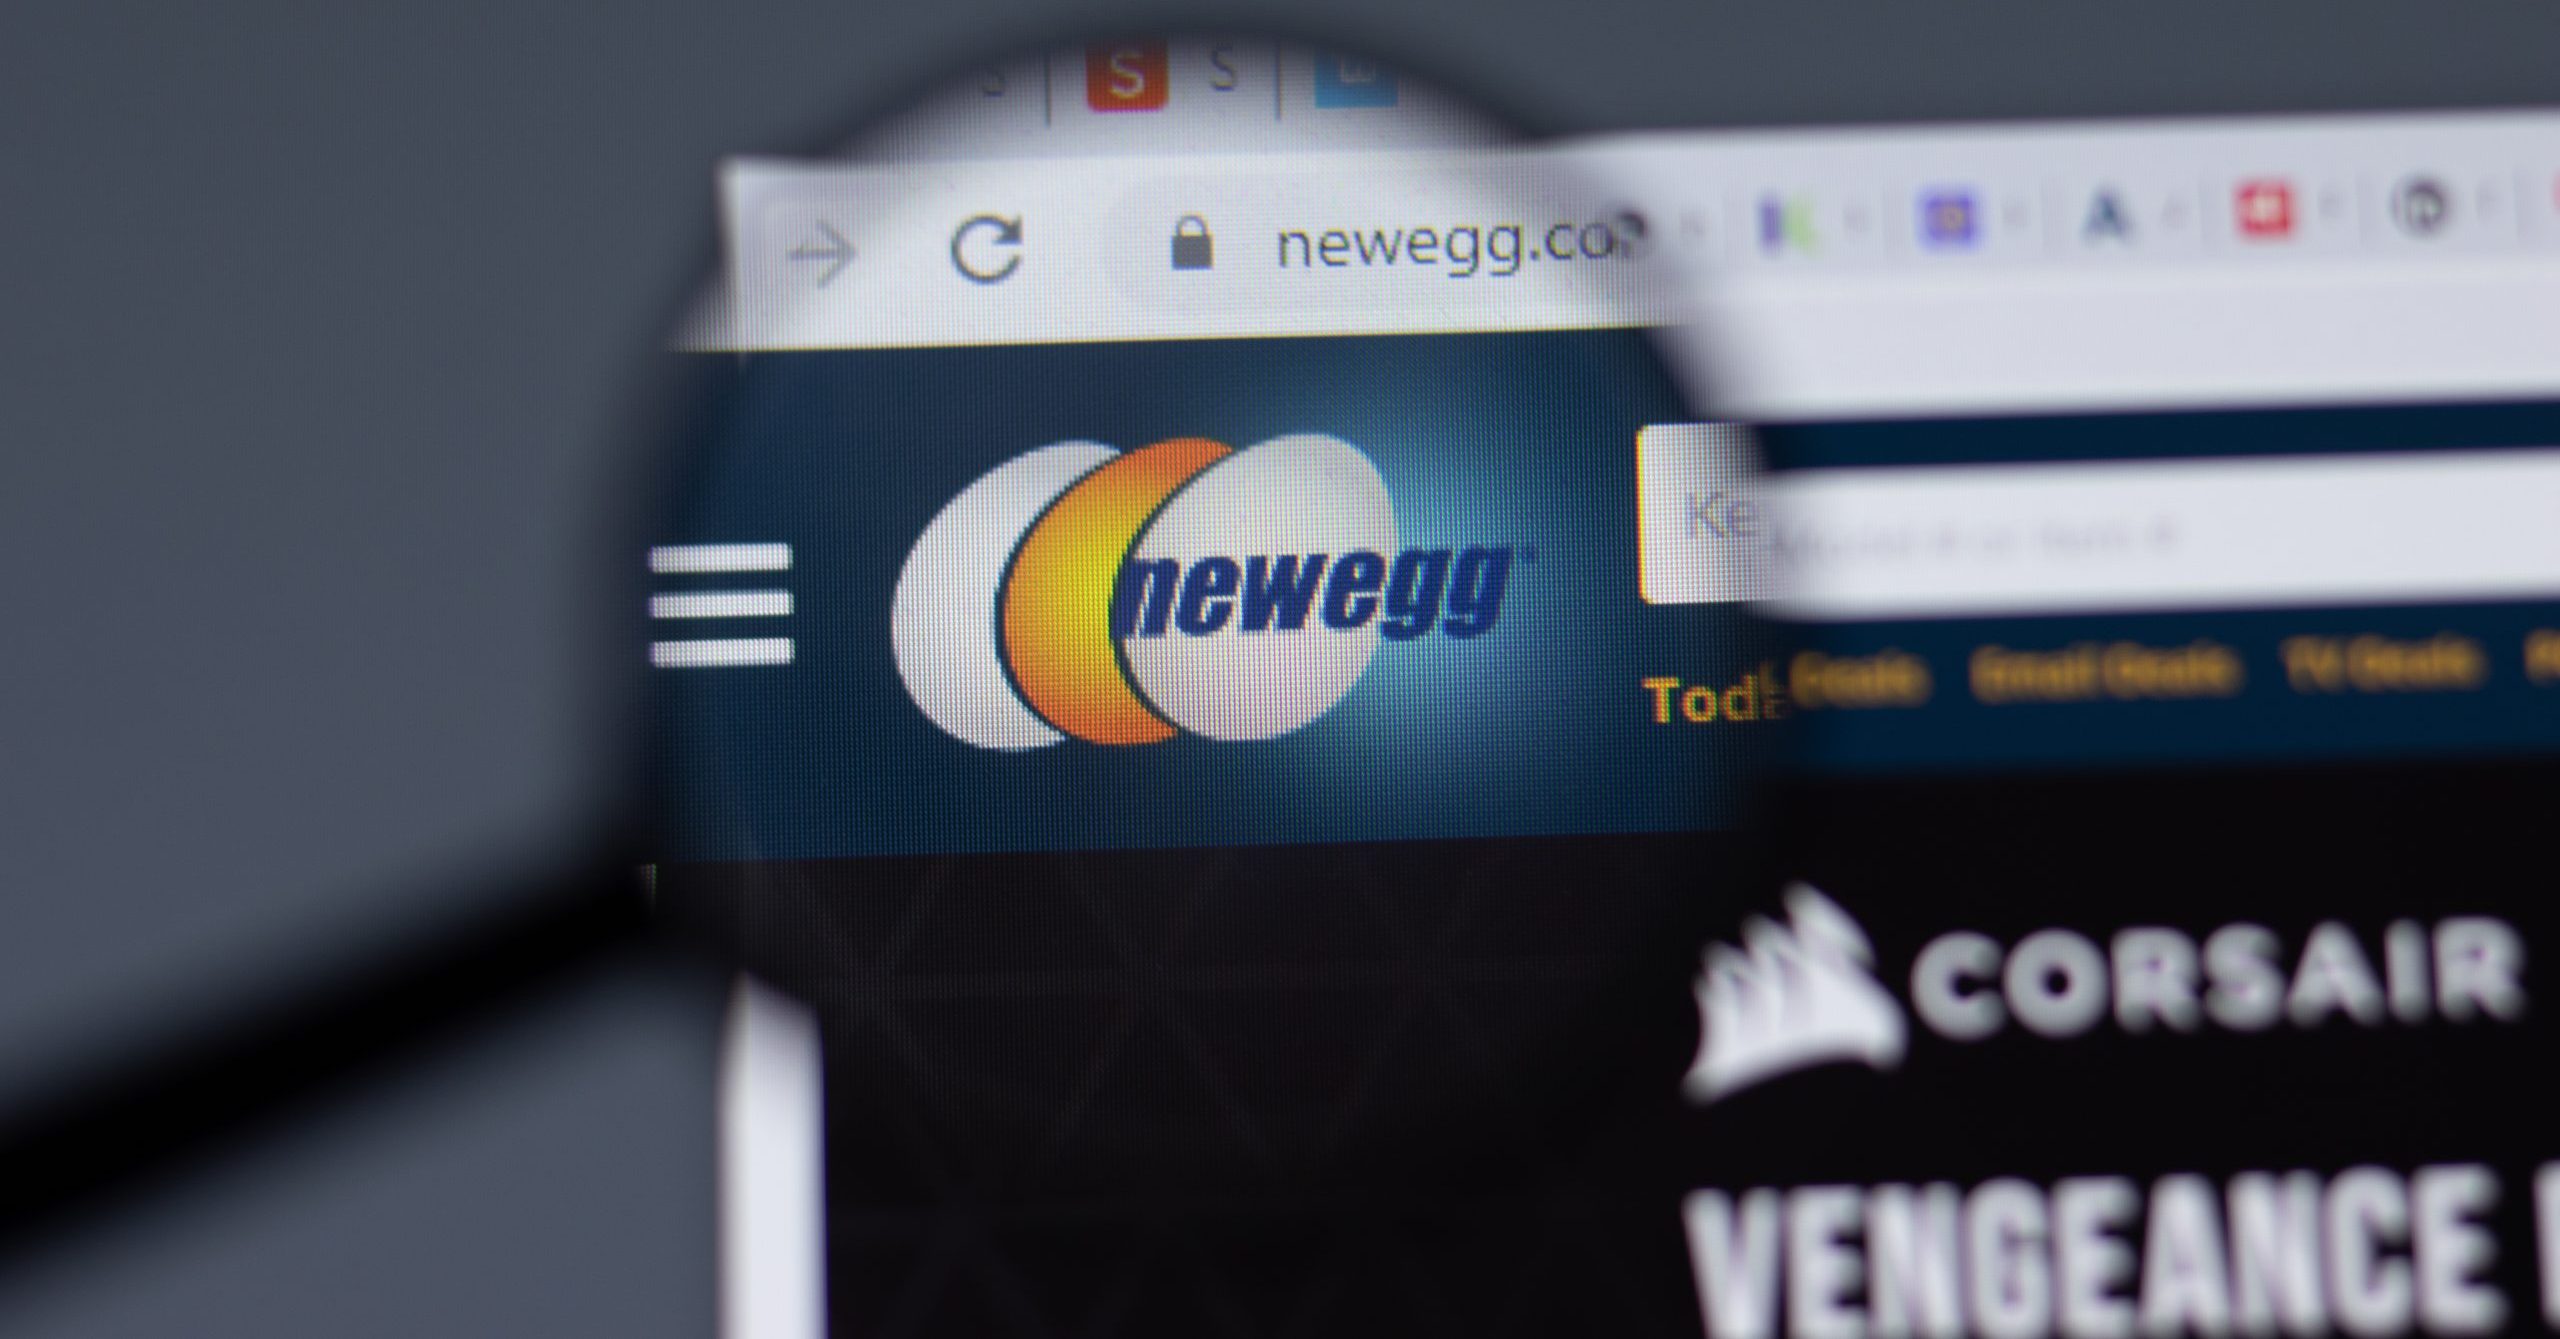 Press Release: Newegg Partners with DriveSavers to Offer Data Recovery Service Plans